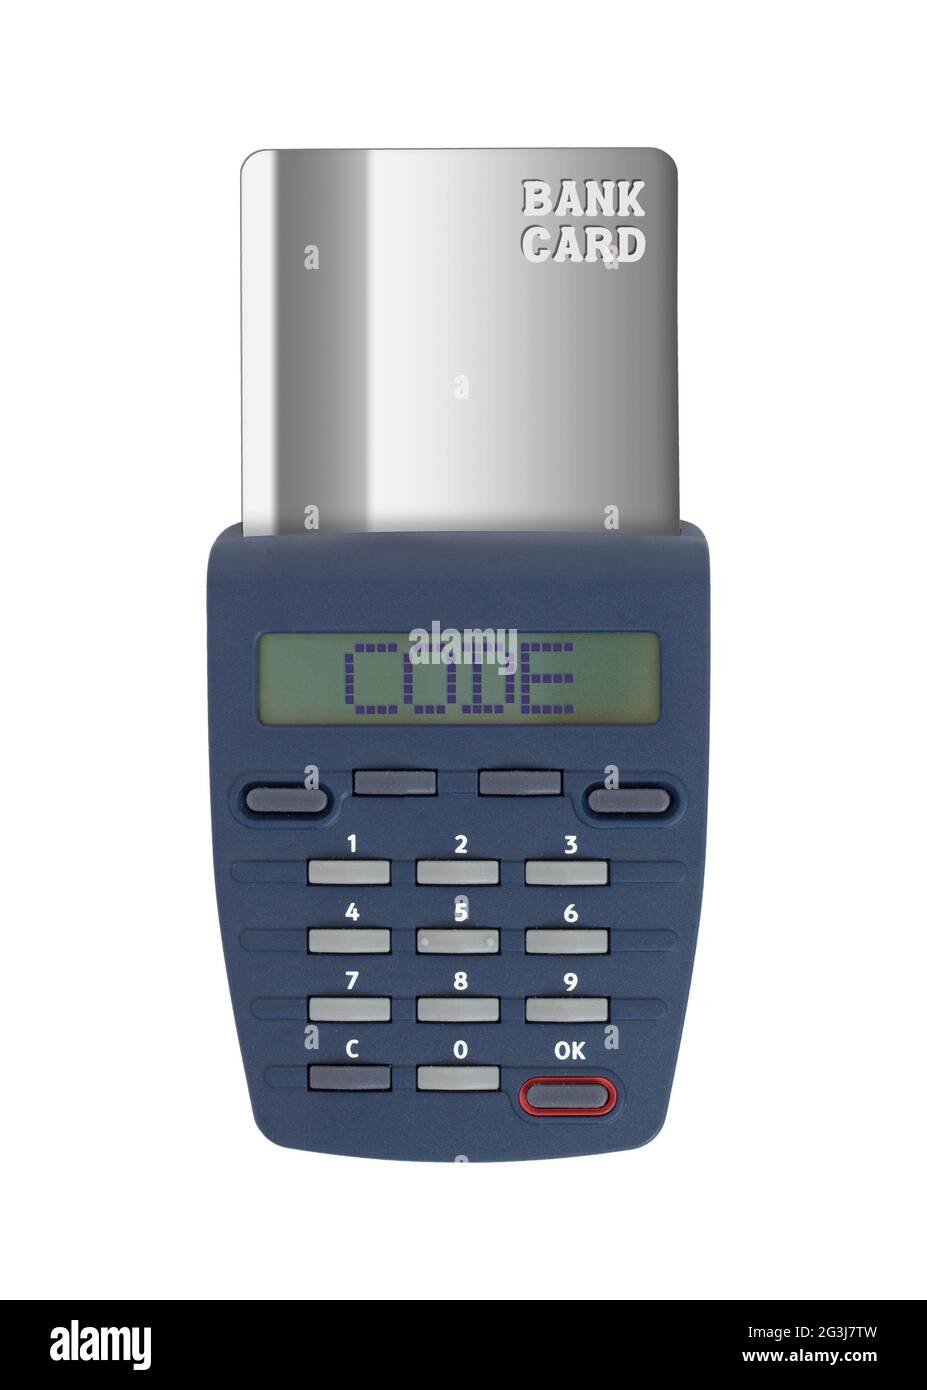 Security device for banking at home Stock Photo